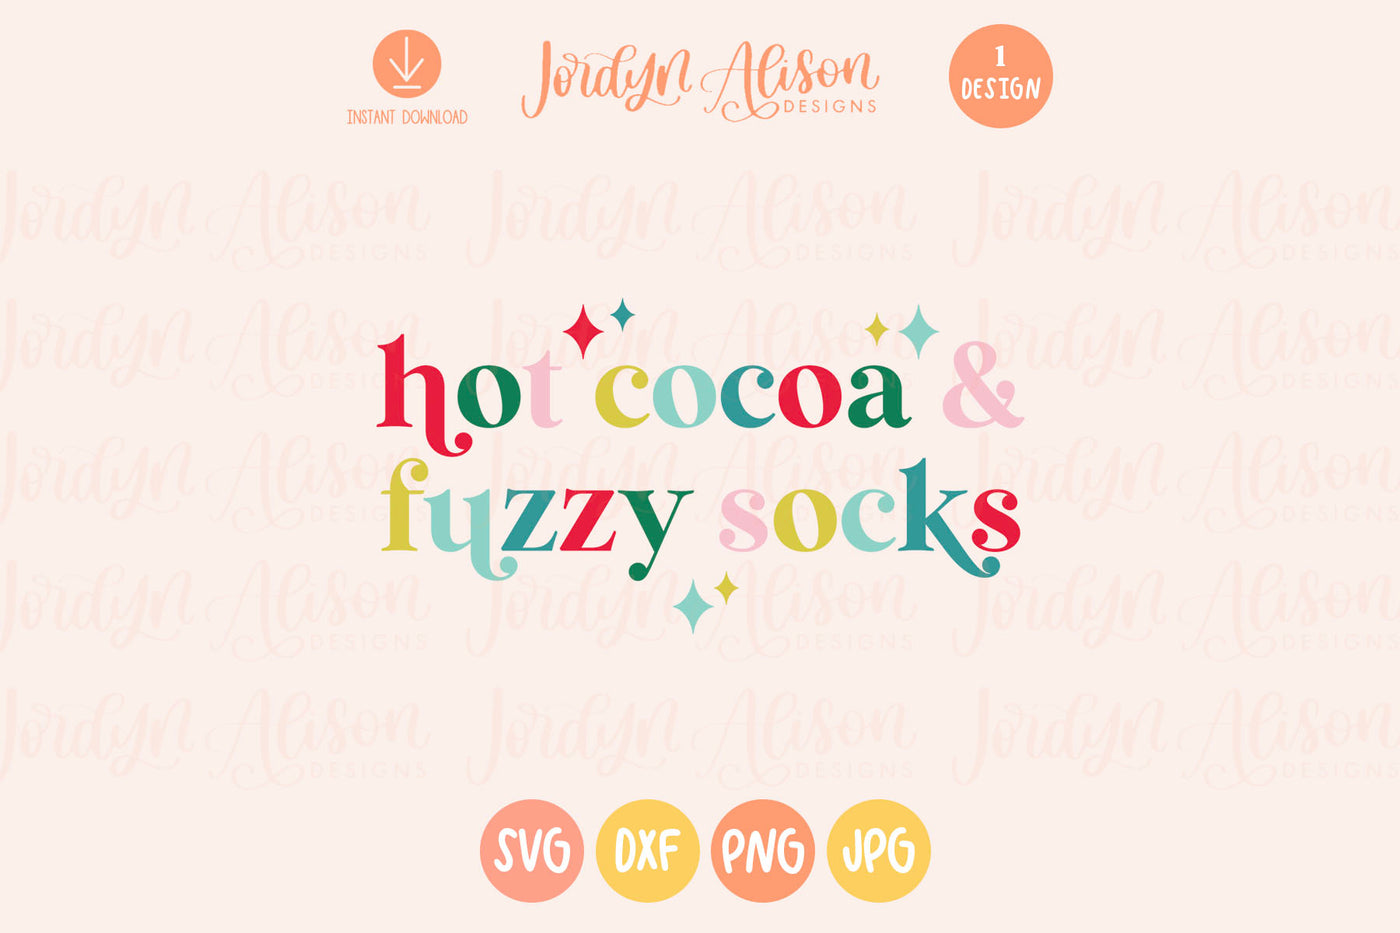 Hot Cocoa and Fuzzy Socks SVG